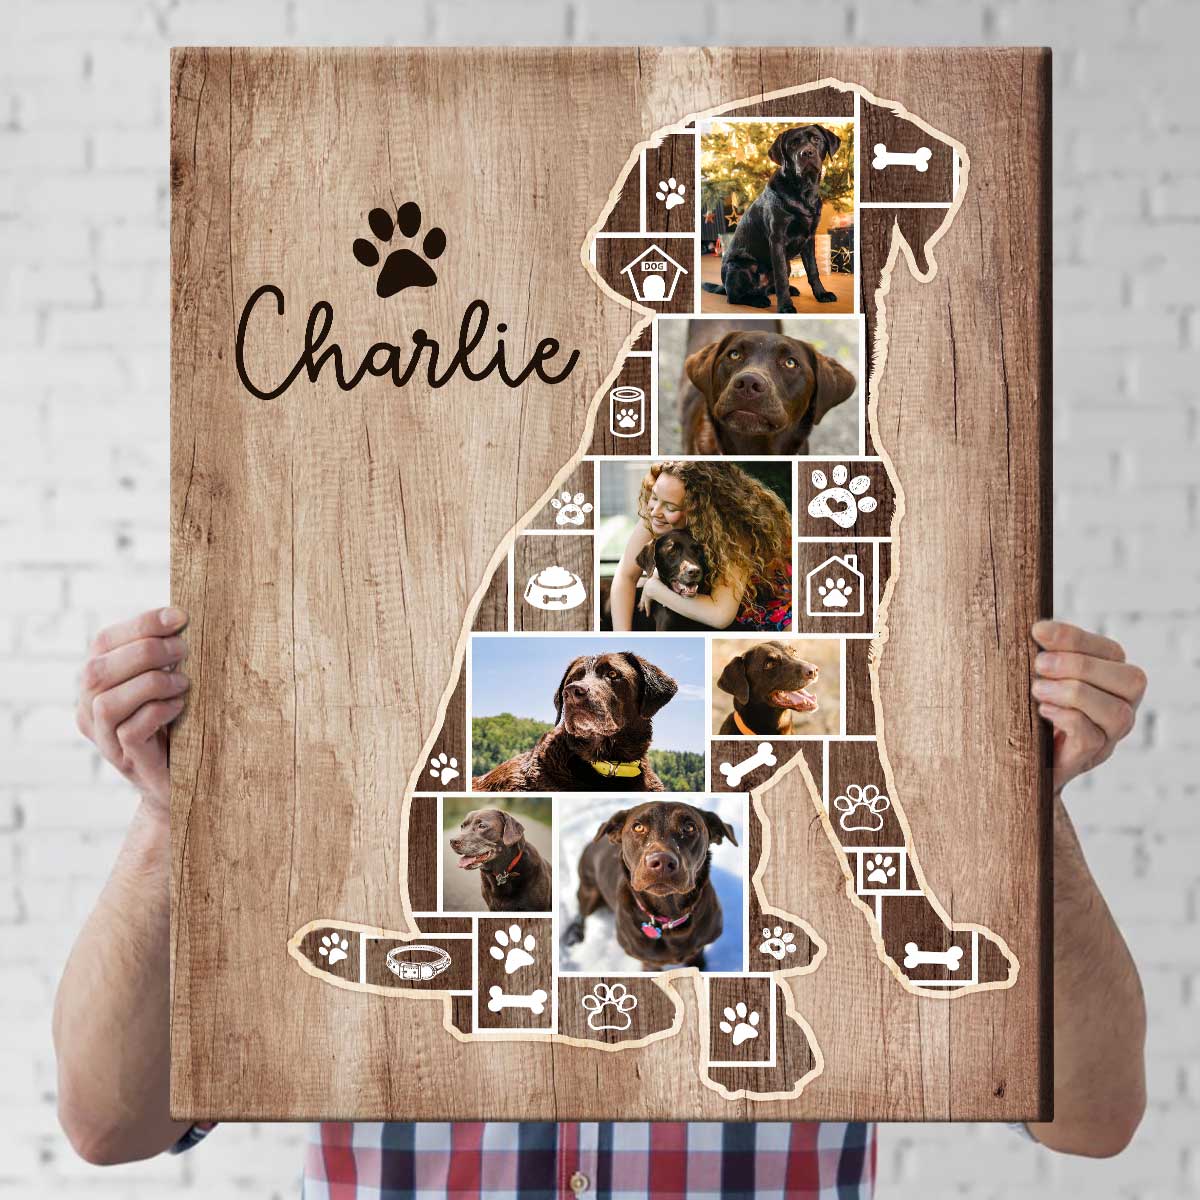 https://benicee.com/wp-content/uploads/2022/10/Labradors-Dog-Photo-Collage-Canvas-Gift-For-Dog-Mom-Dog-Dad-Custom-Silhouette-Chocolate-Lab-Dog-Gift-5.jpg